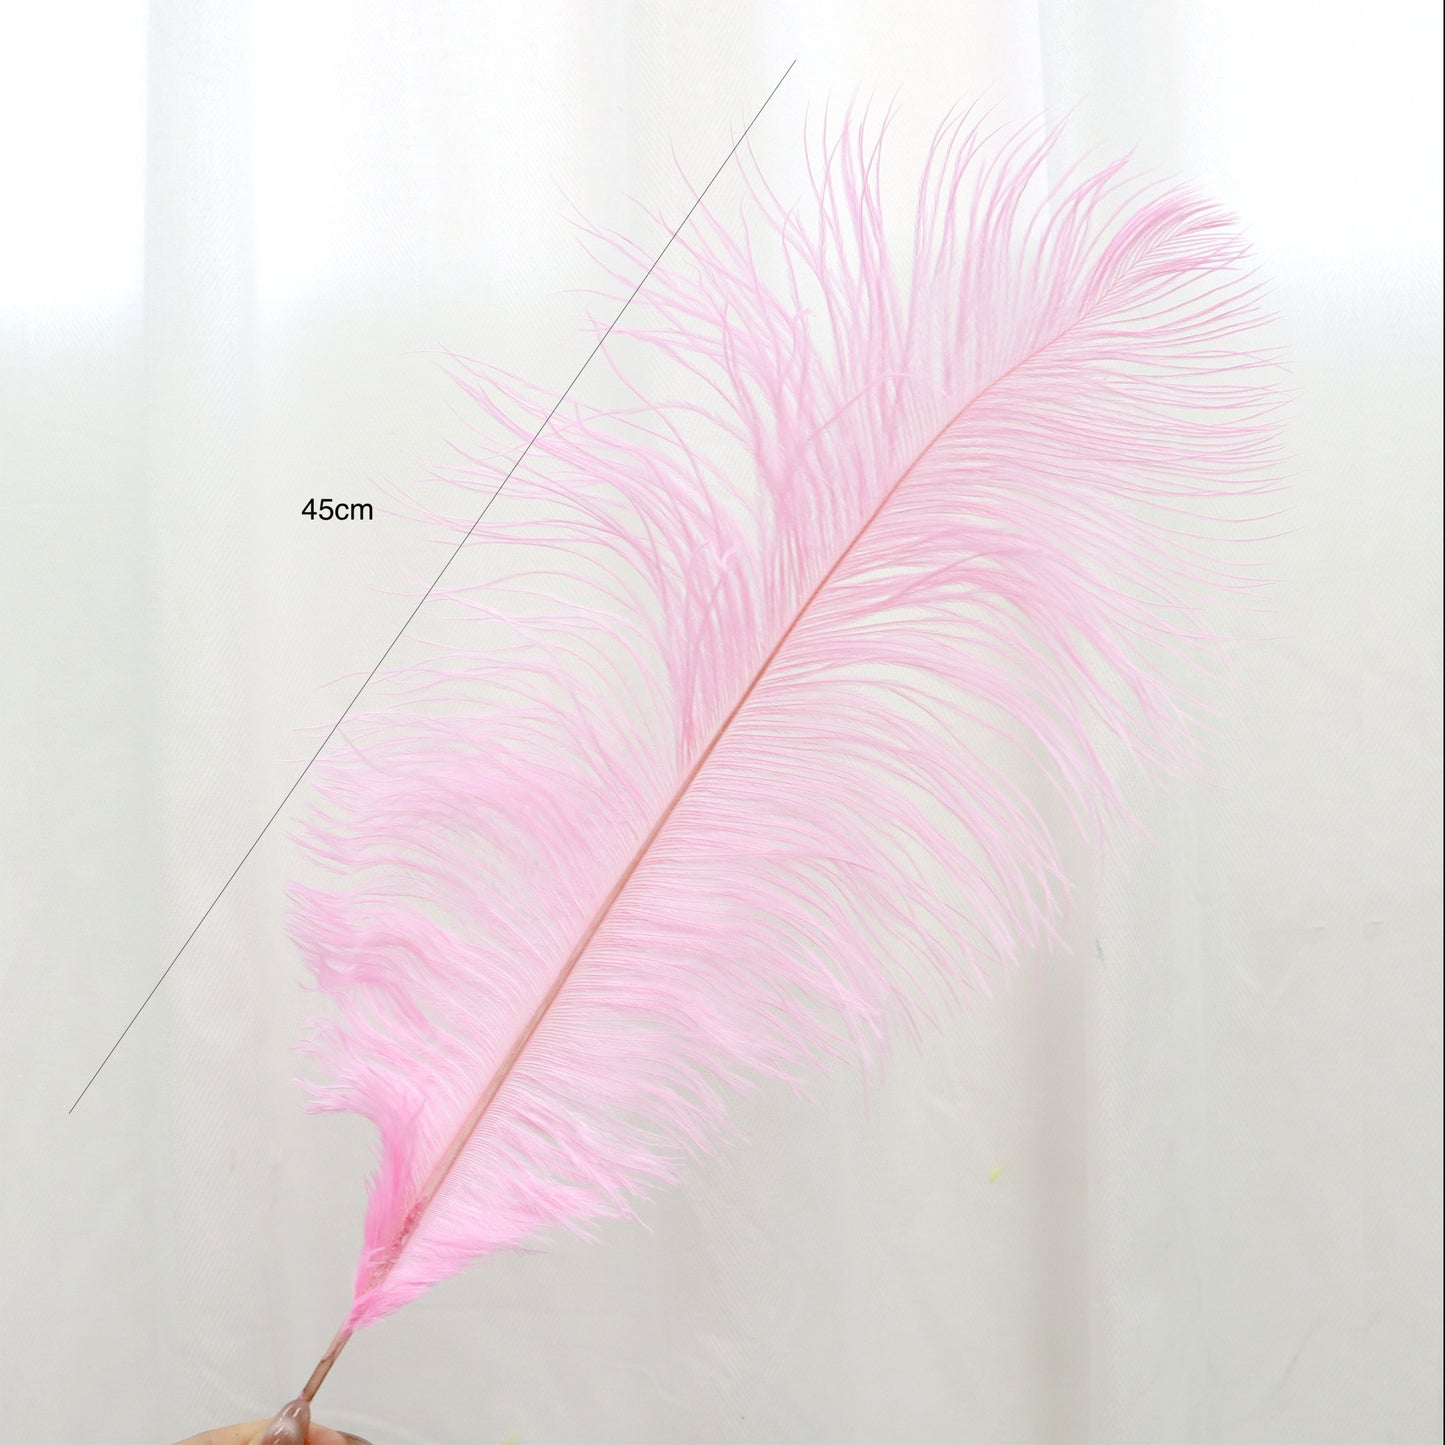 5 pcs Ostrich Feathers Hot Pink